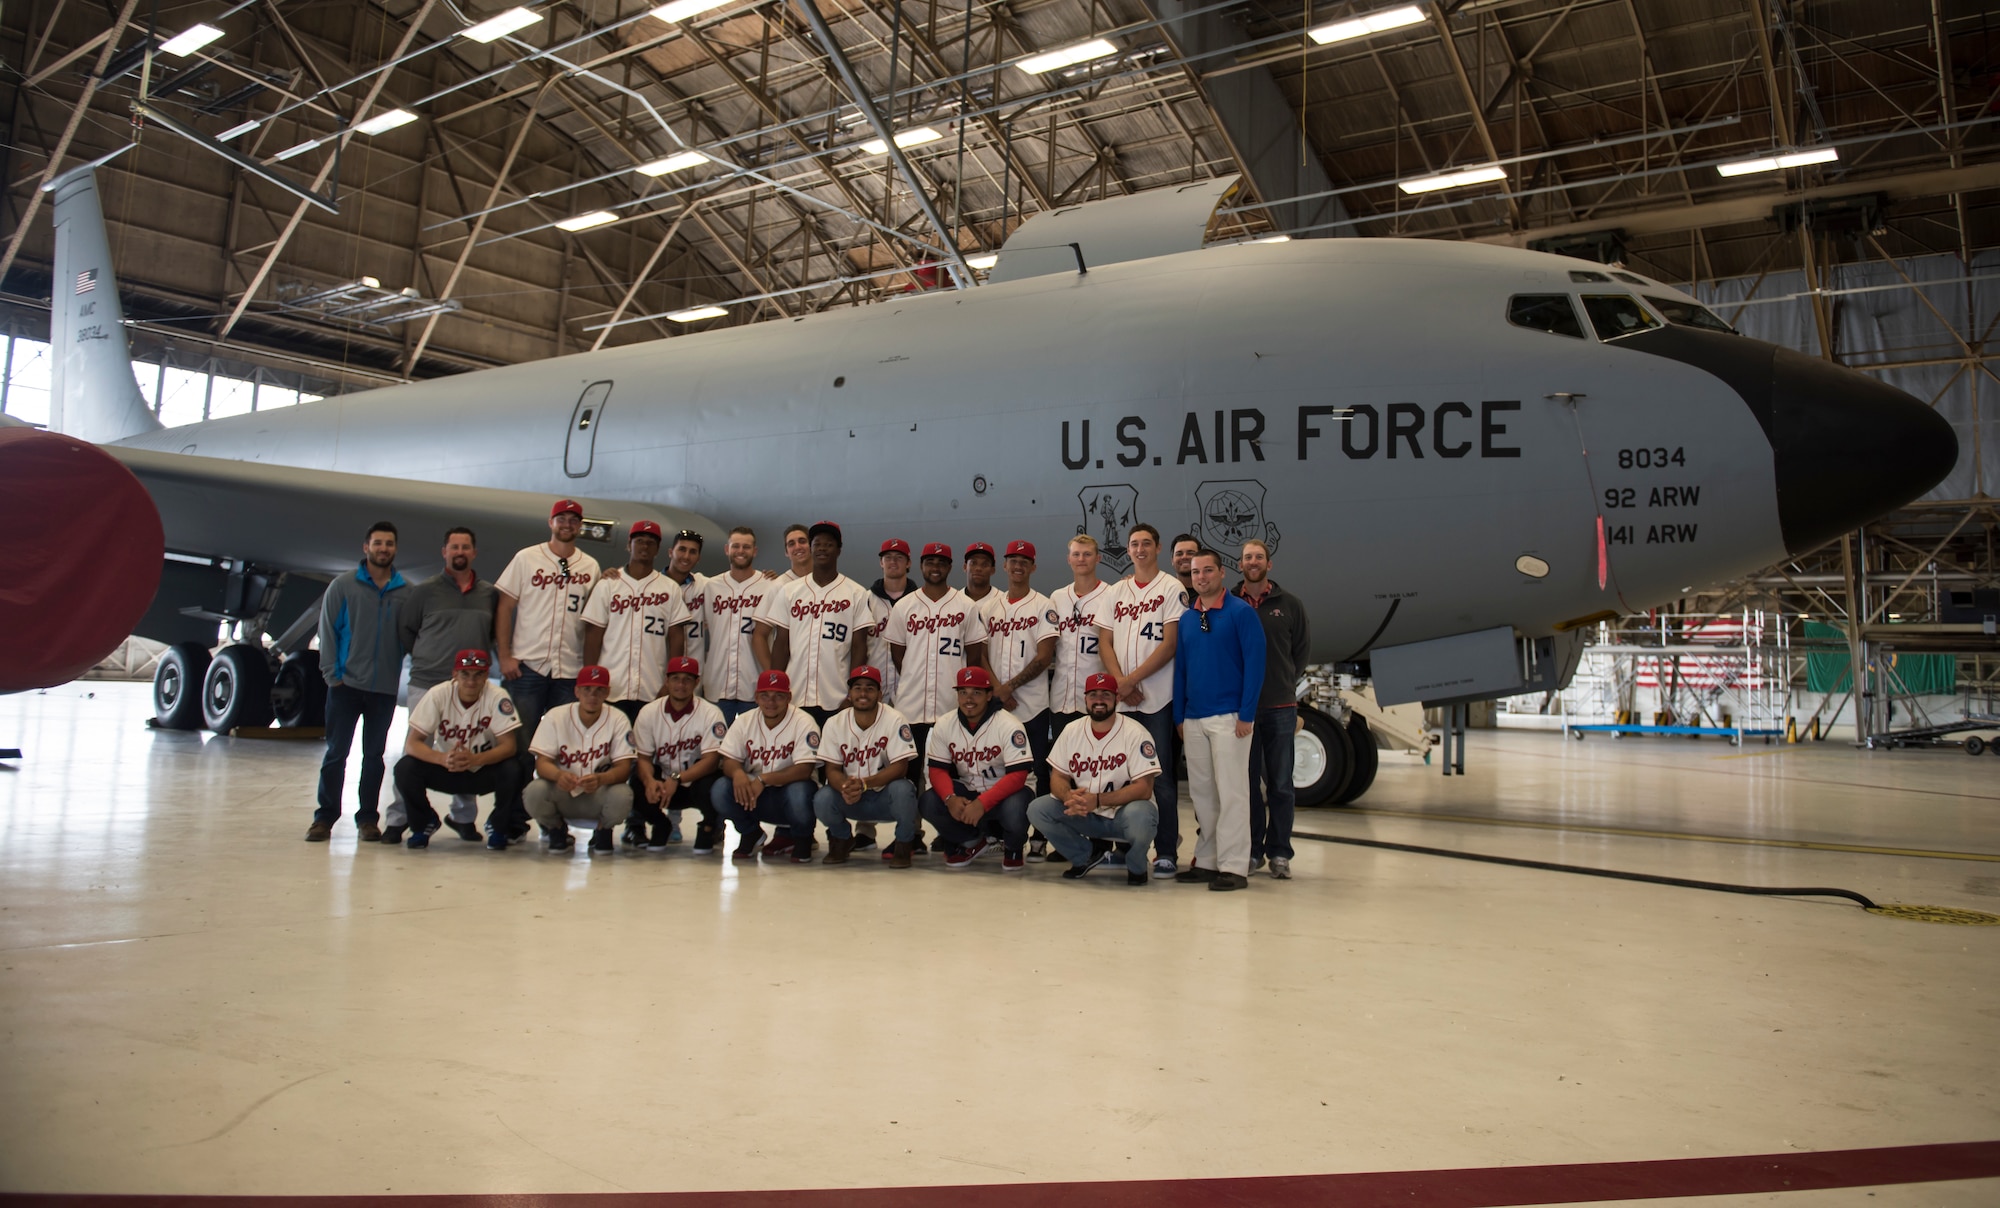 The Spokane Indians Baseball team take a group photo in front of a KC-135 Stratotanker at Fairchild Air Force Base, Wash. June 12, 2018. Not only did the Spokane Indians learn about the importance of teamwork in the military during their base tour, they also had the opportunity to catch a glimpse of how young men and women in uniform serve their country. (U.S. Air Force photo/Senior Airman Sean Campbell)